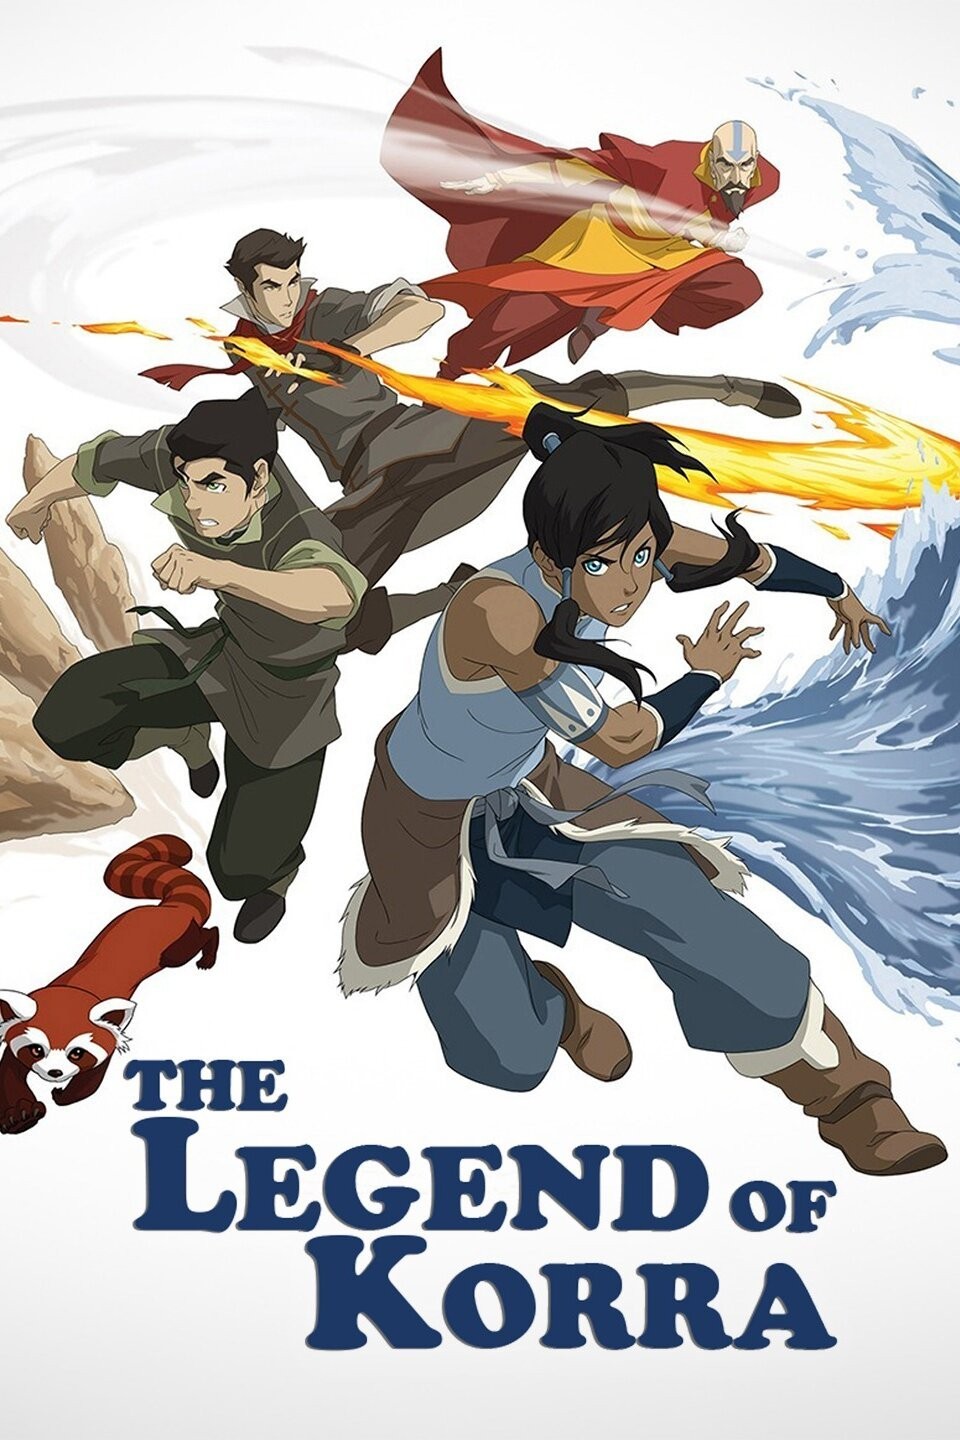 How to Watch Avatar and The Legend of Korra For Free